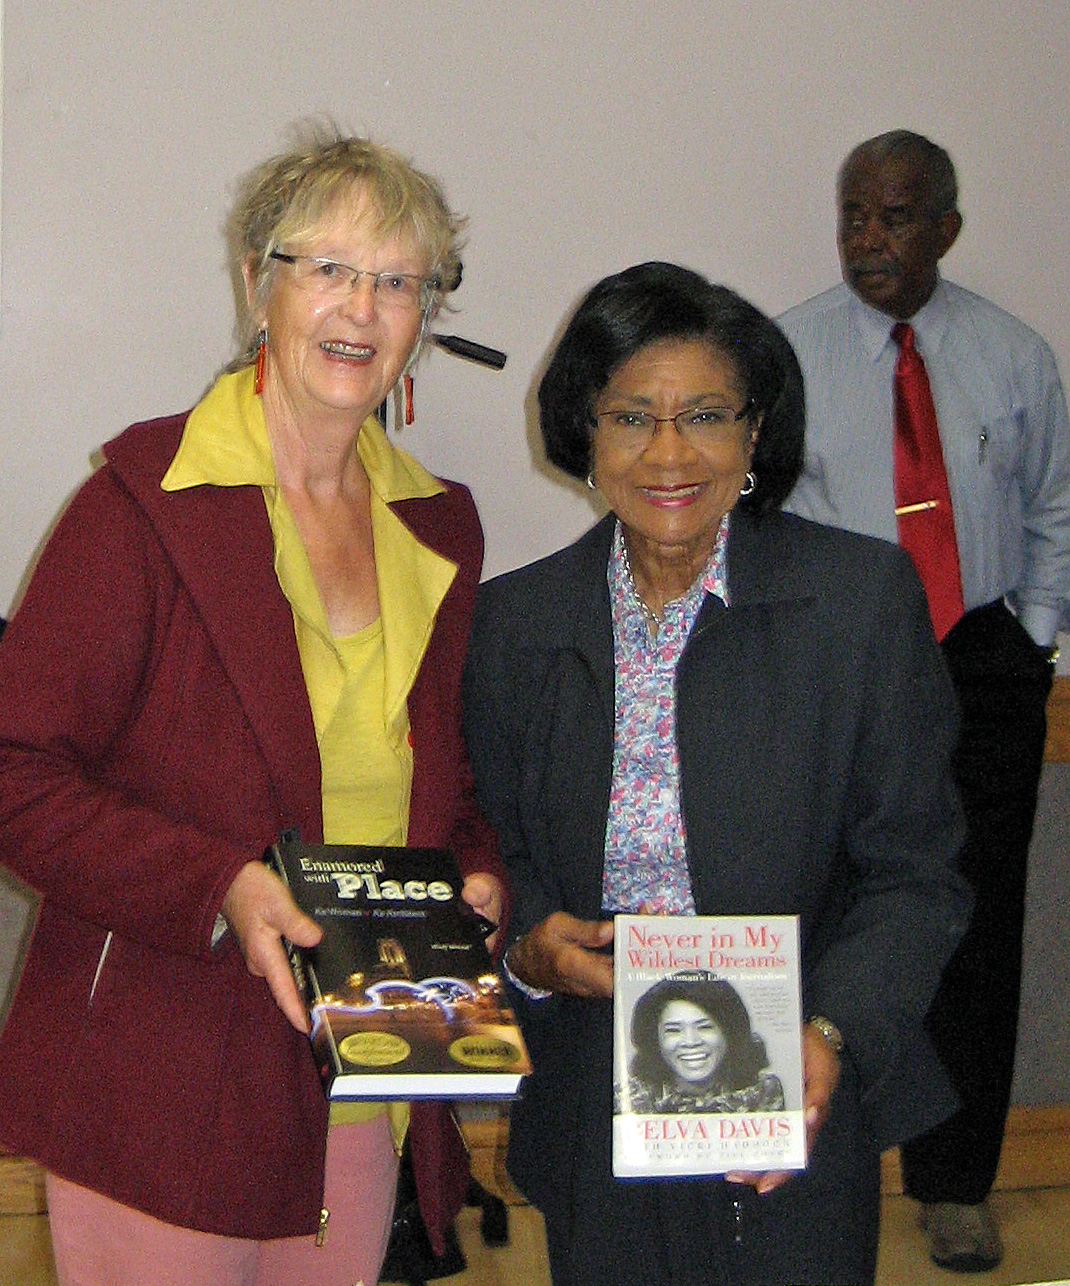 Wendy and Belva Davis and oour memoirs